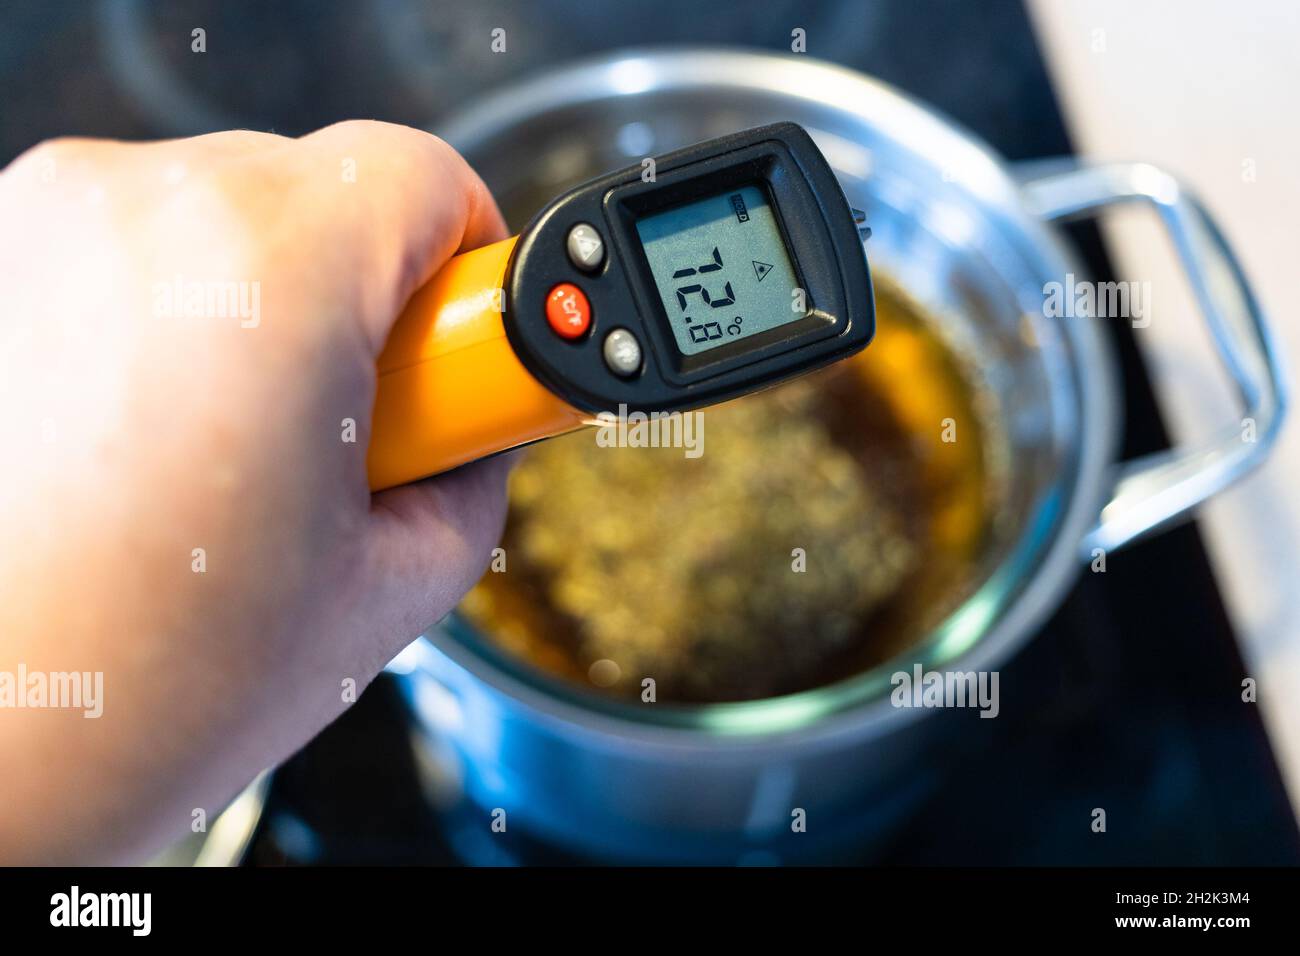 https://c8.alamy.com/comp/2H2K3M4/measuring-temperature-of-cooking-tincture-from-medicinal-herbs-in-water-bath-by-infrared-thermometer-on-ceramic-stove-at-home-kitchen-2H2K3M4.jpg